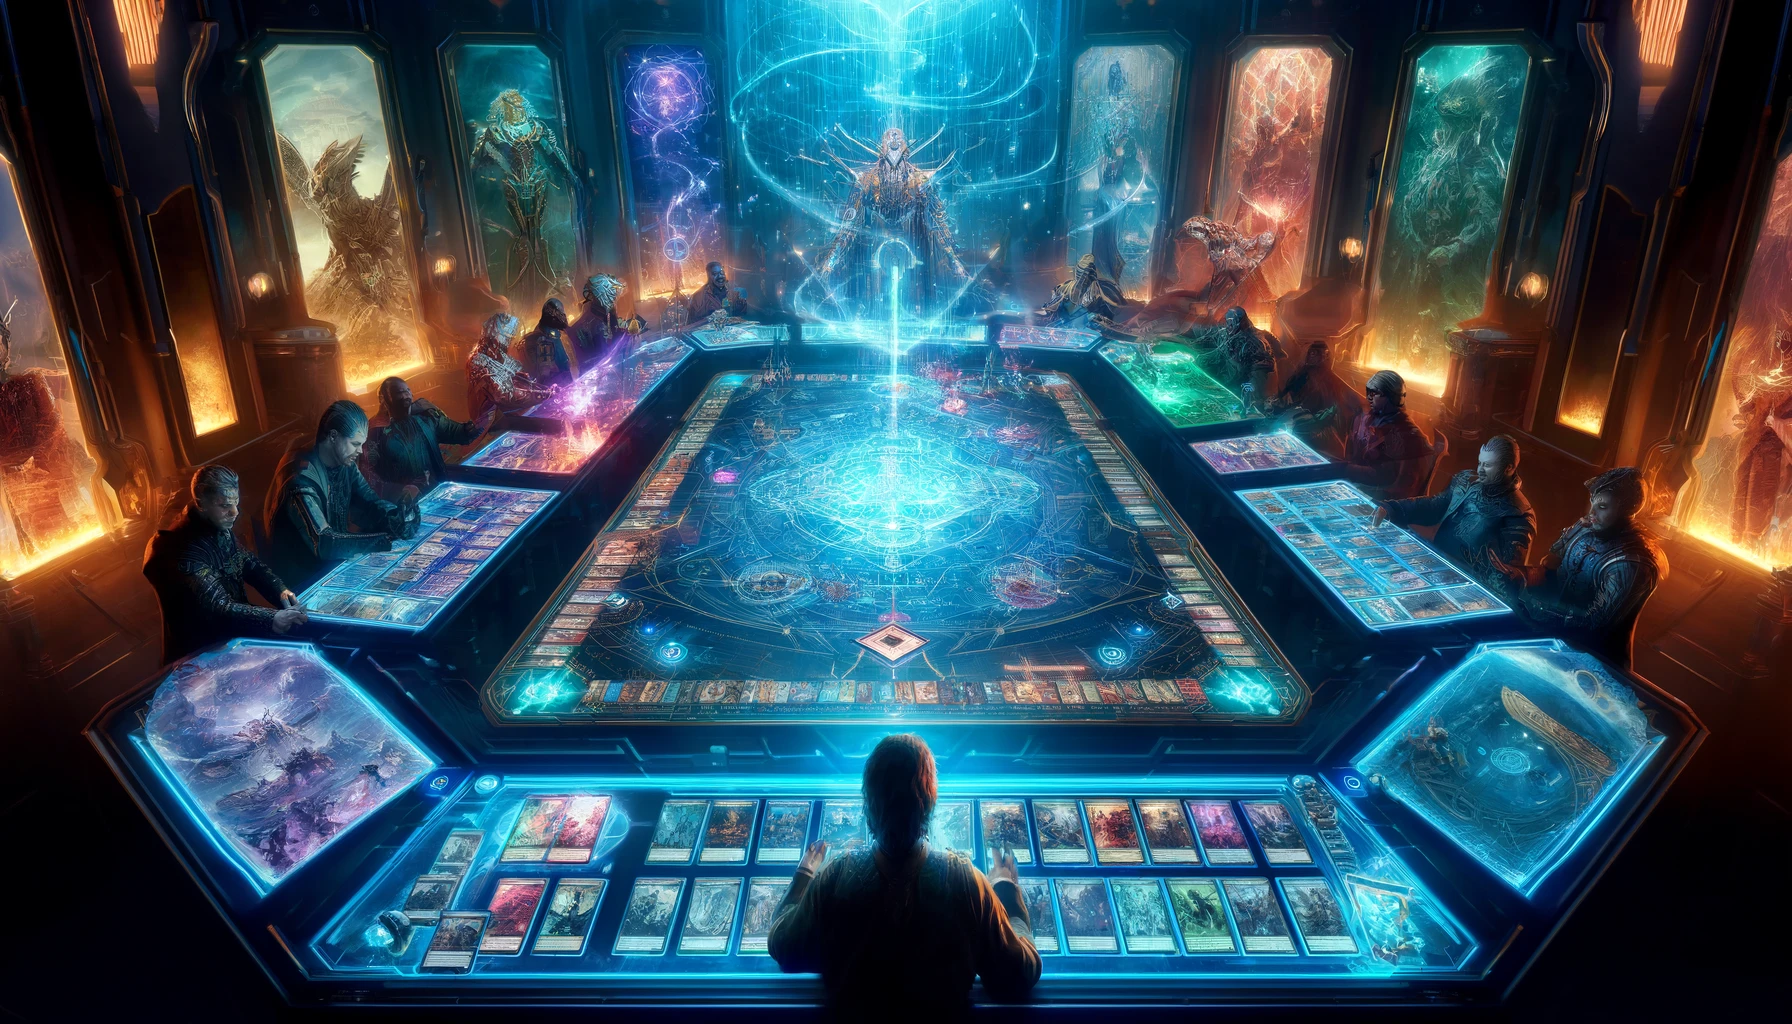 Players engage in an intense card game, strategizing around a holographic table with cosmic entities.